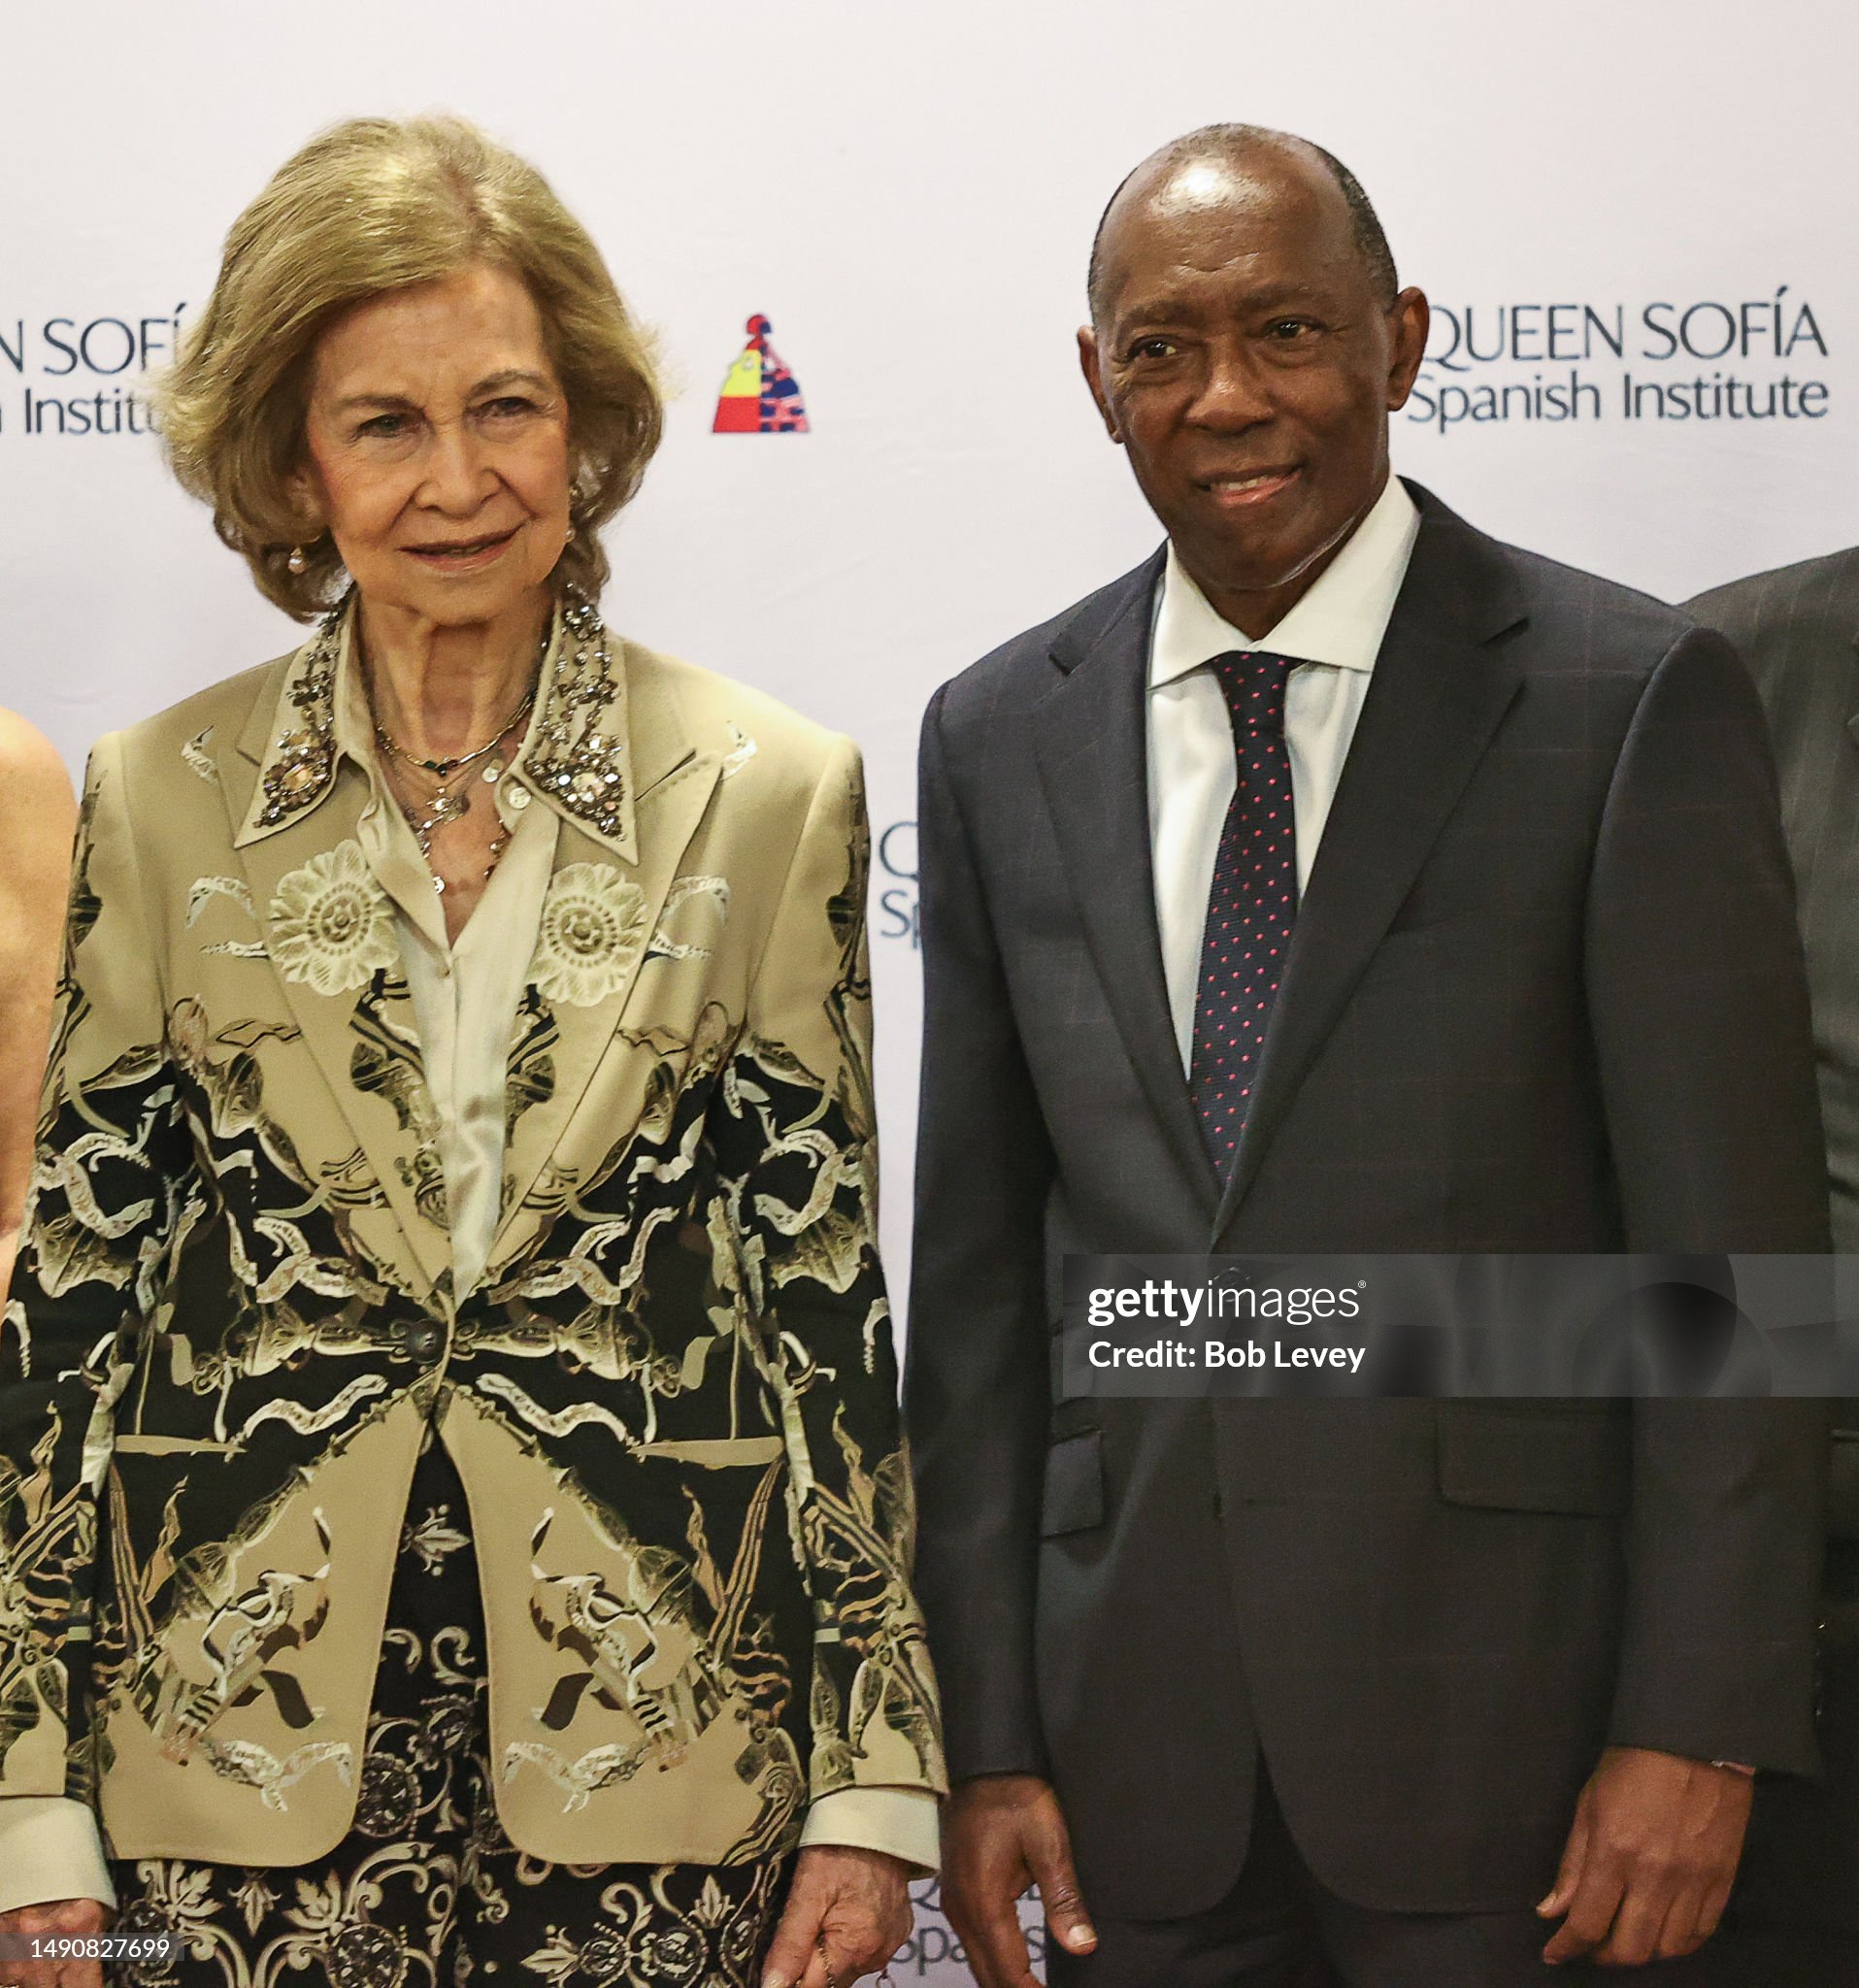 queen-sofia-of-spain-and-houston-mayor-sylvester-turner-at-julia-ideson-building-on-may-16.jpg